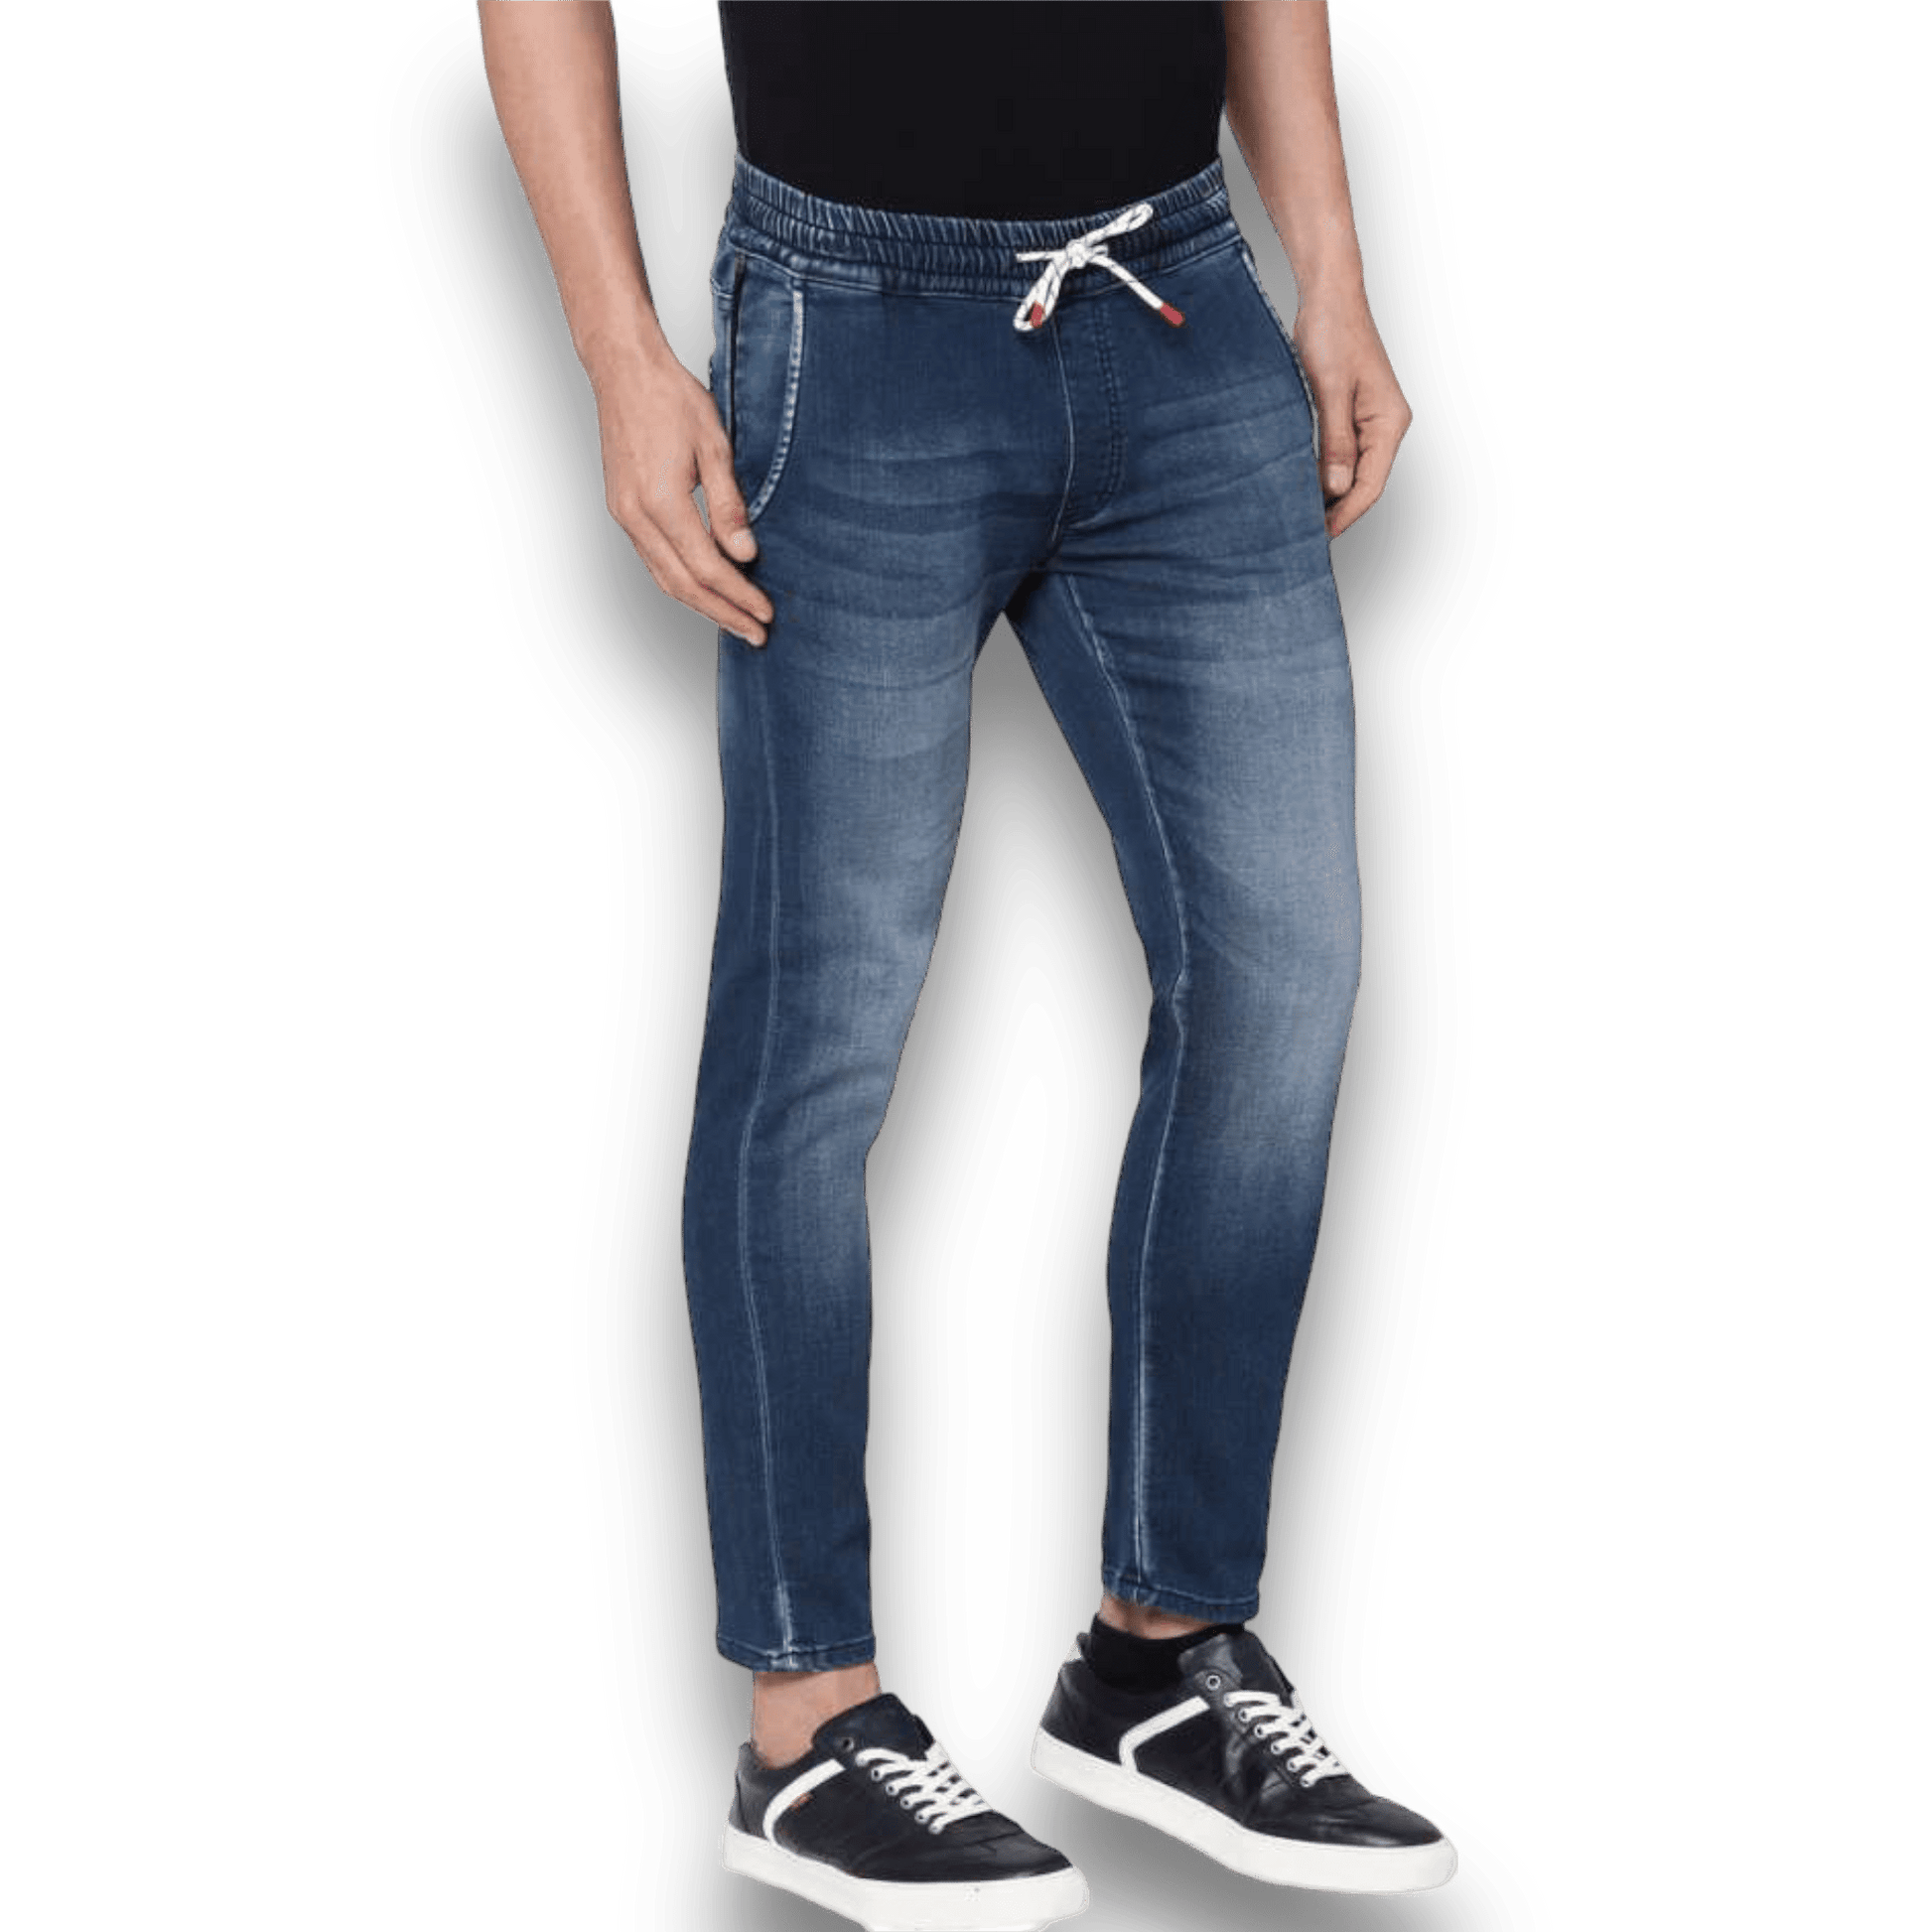 Mens Jogger Fit mid rise Blue Jeans - Apparel For Less